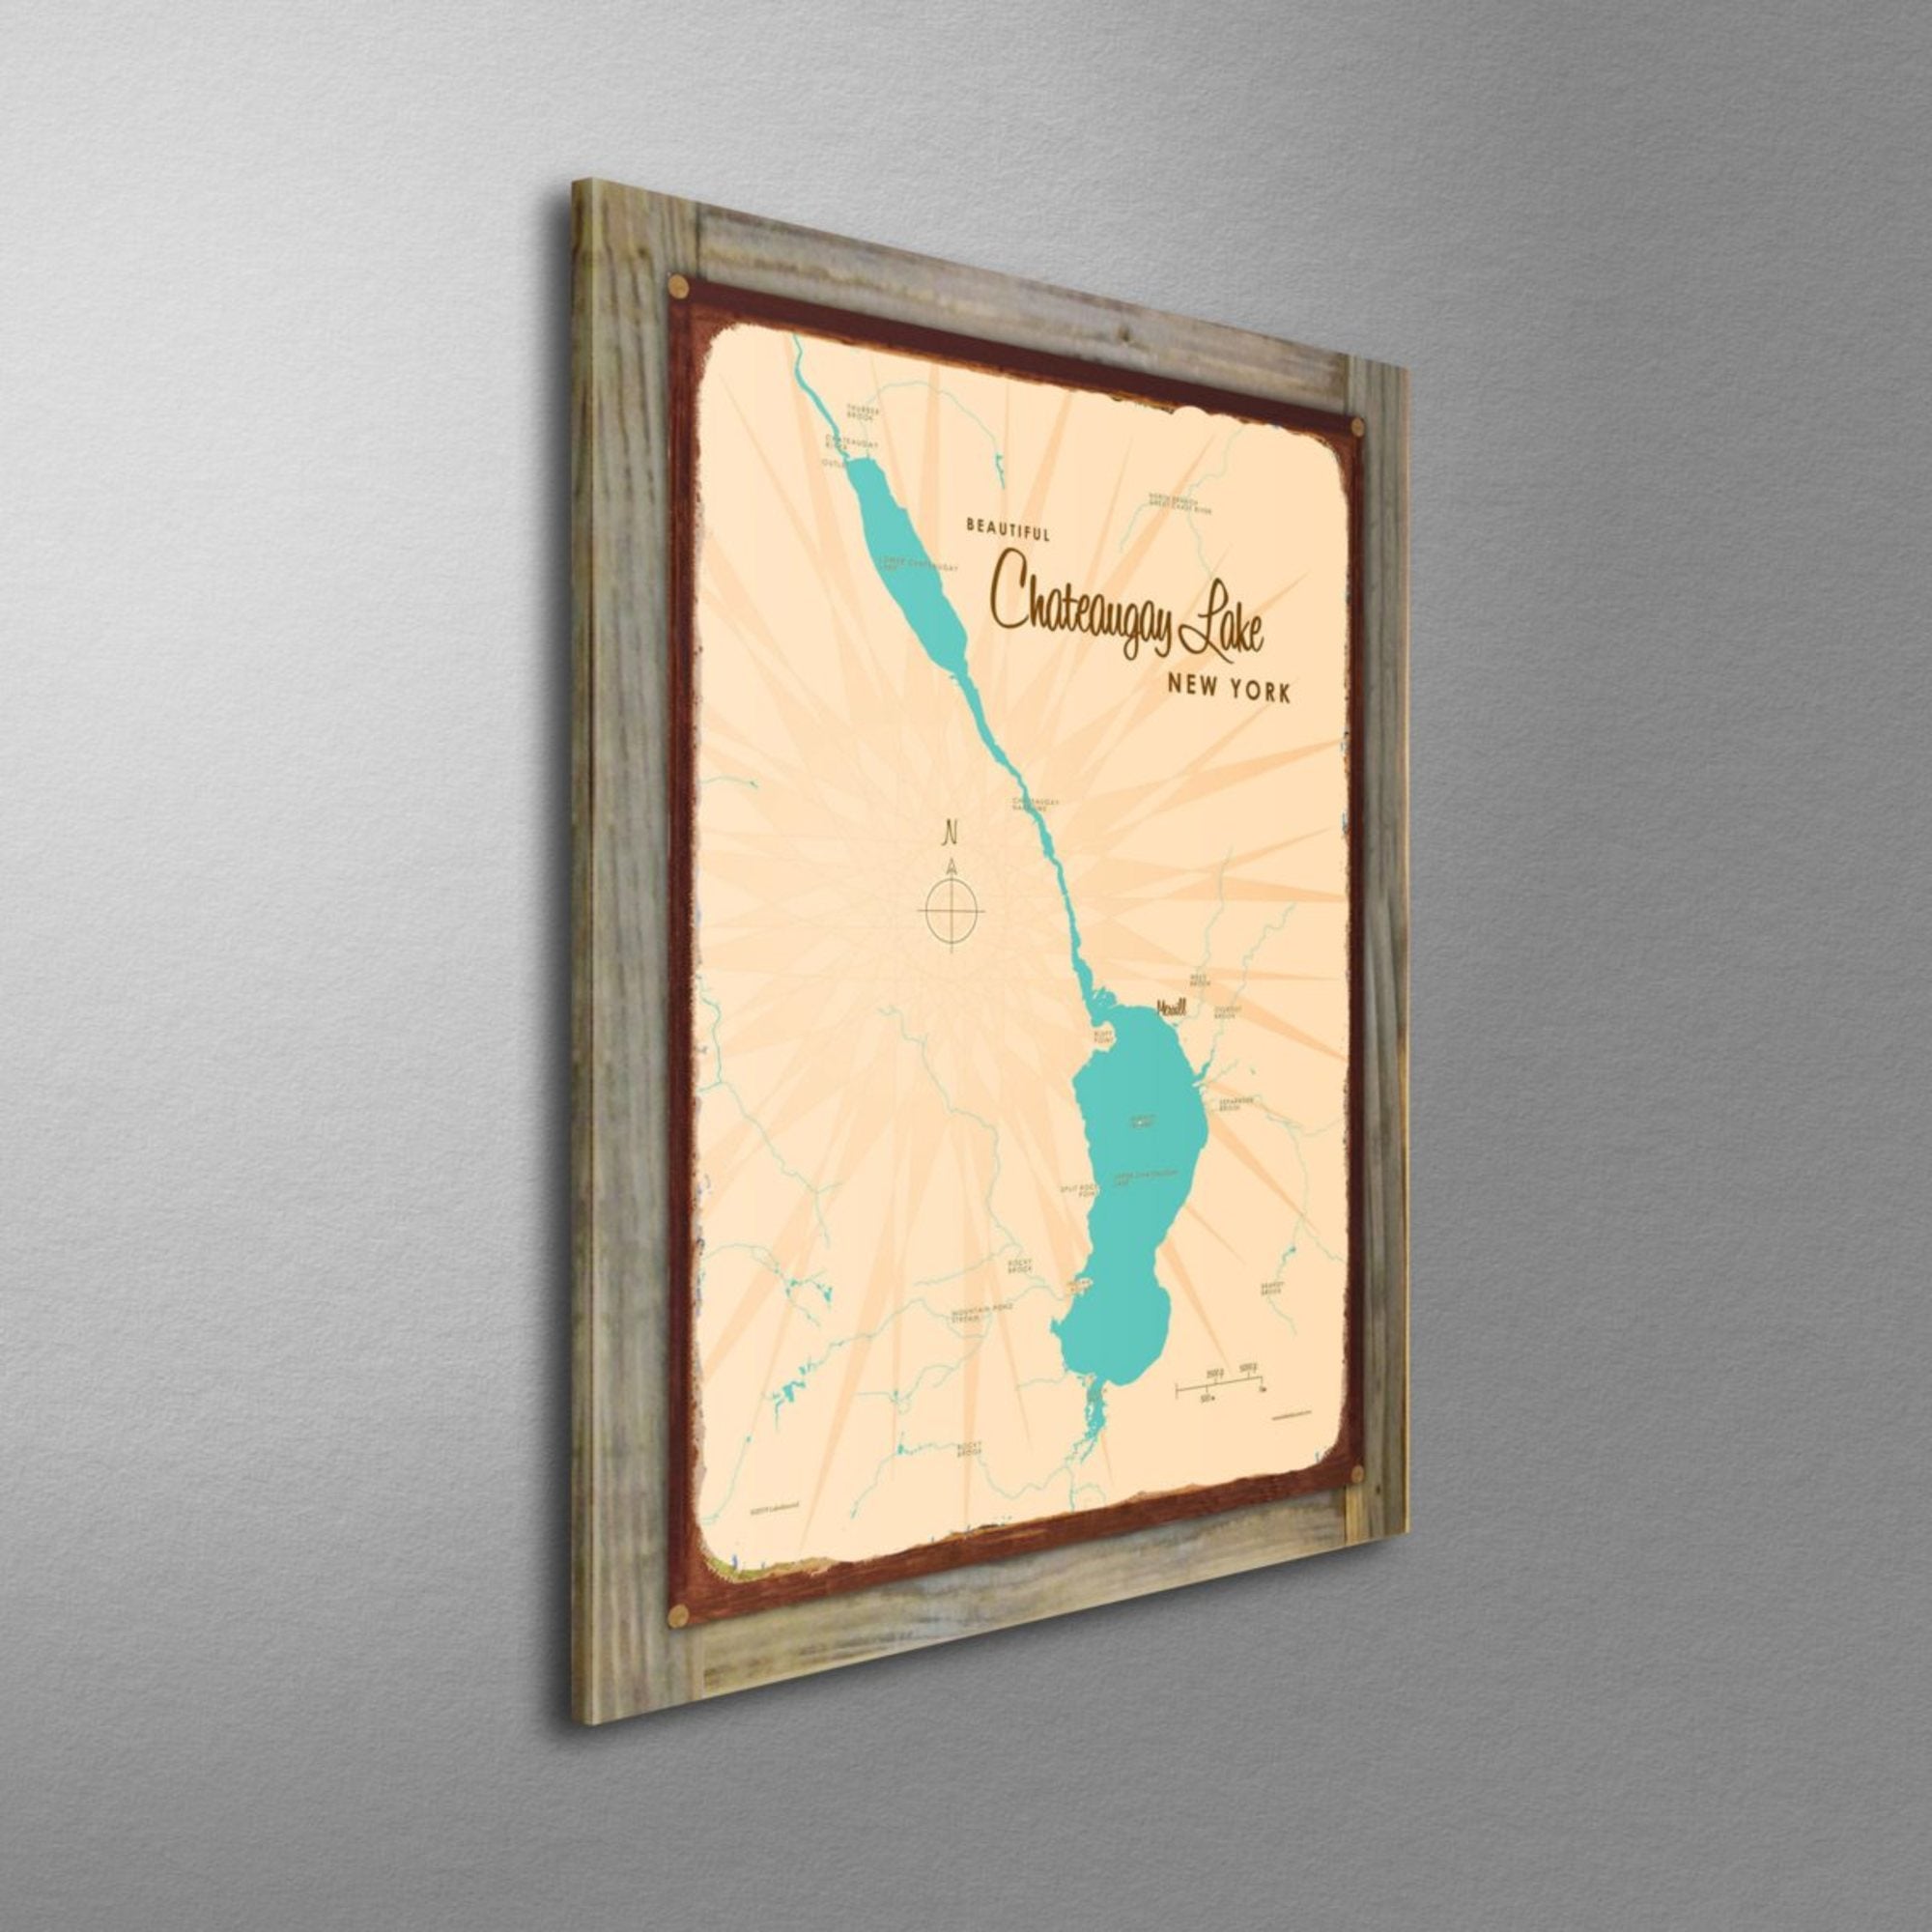 Chateaugay Lake New York, Wood-Mounted Rustic Metal Sign Map Art